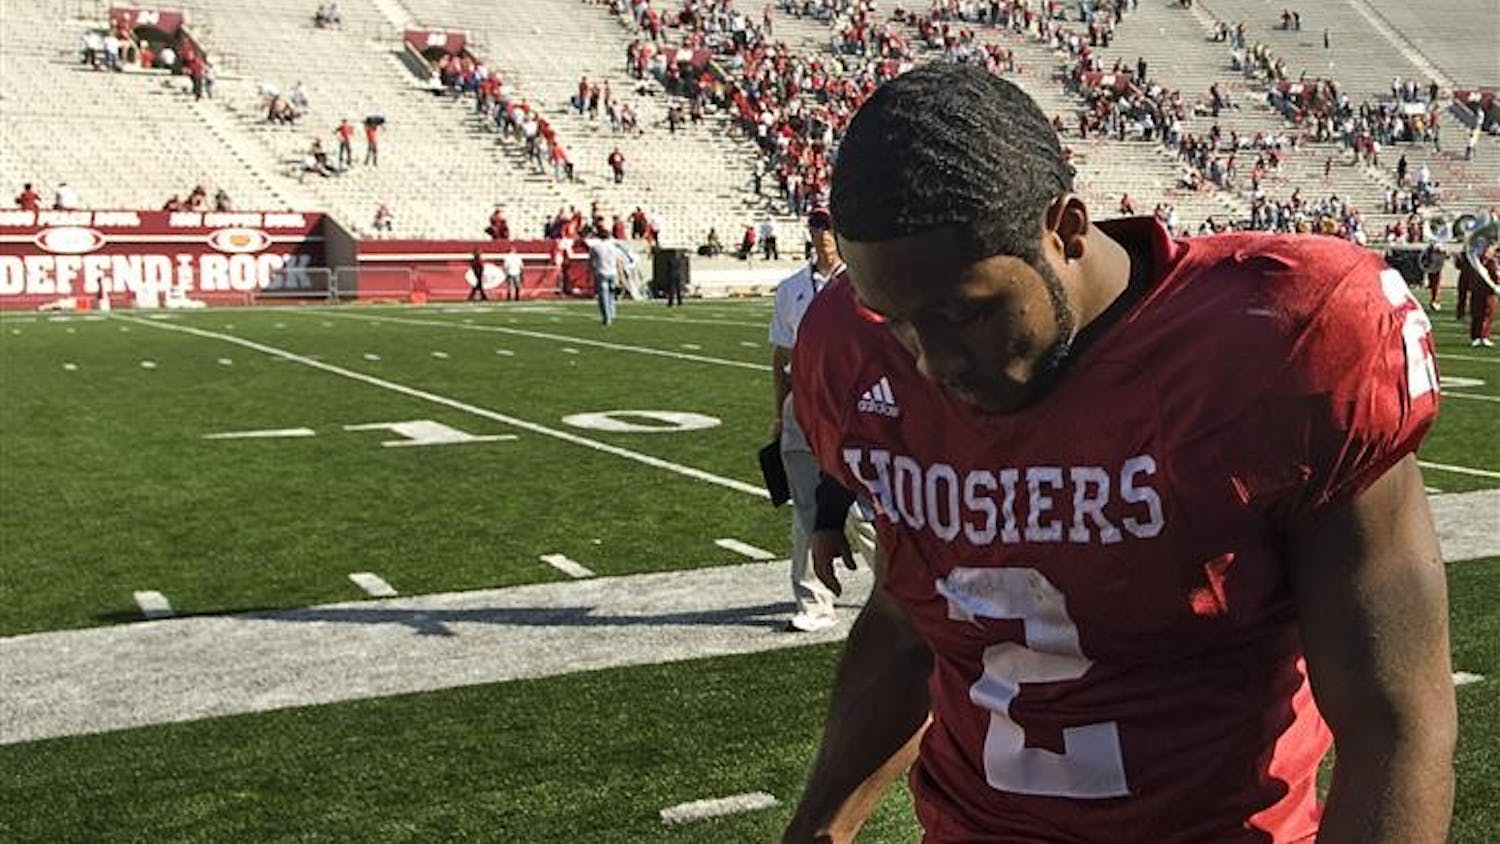 Senior running back Marcus Thigpen walks off the field following Indiana's 37-34 loss to Central Michigan on Saturday at Memorial Stadium.  Thigpen ran for 109 yards and two touchdowns.